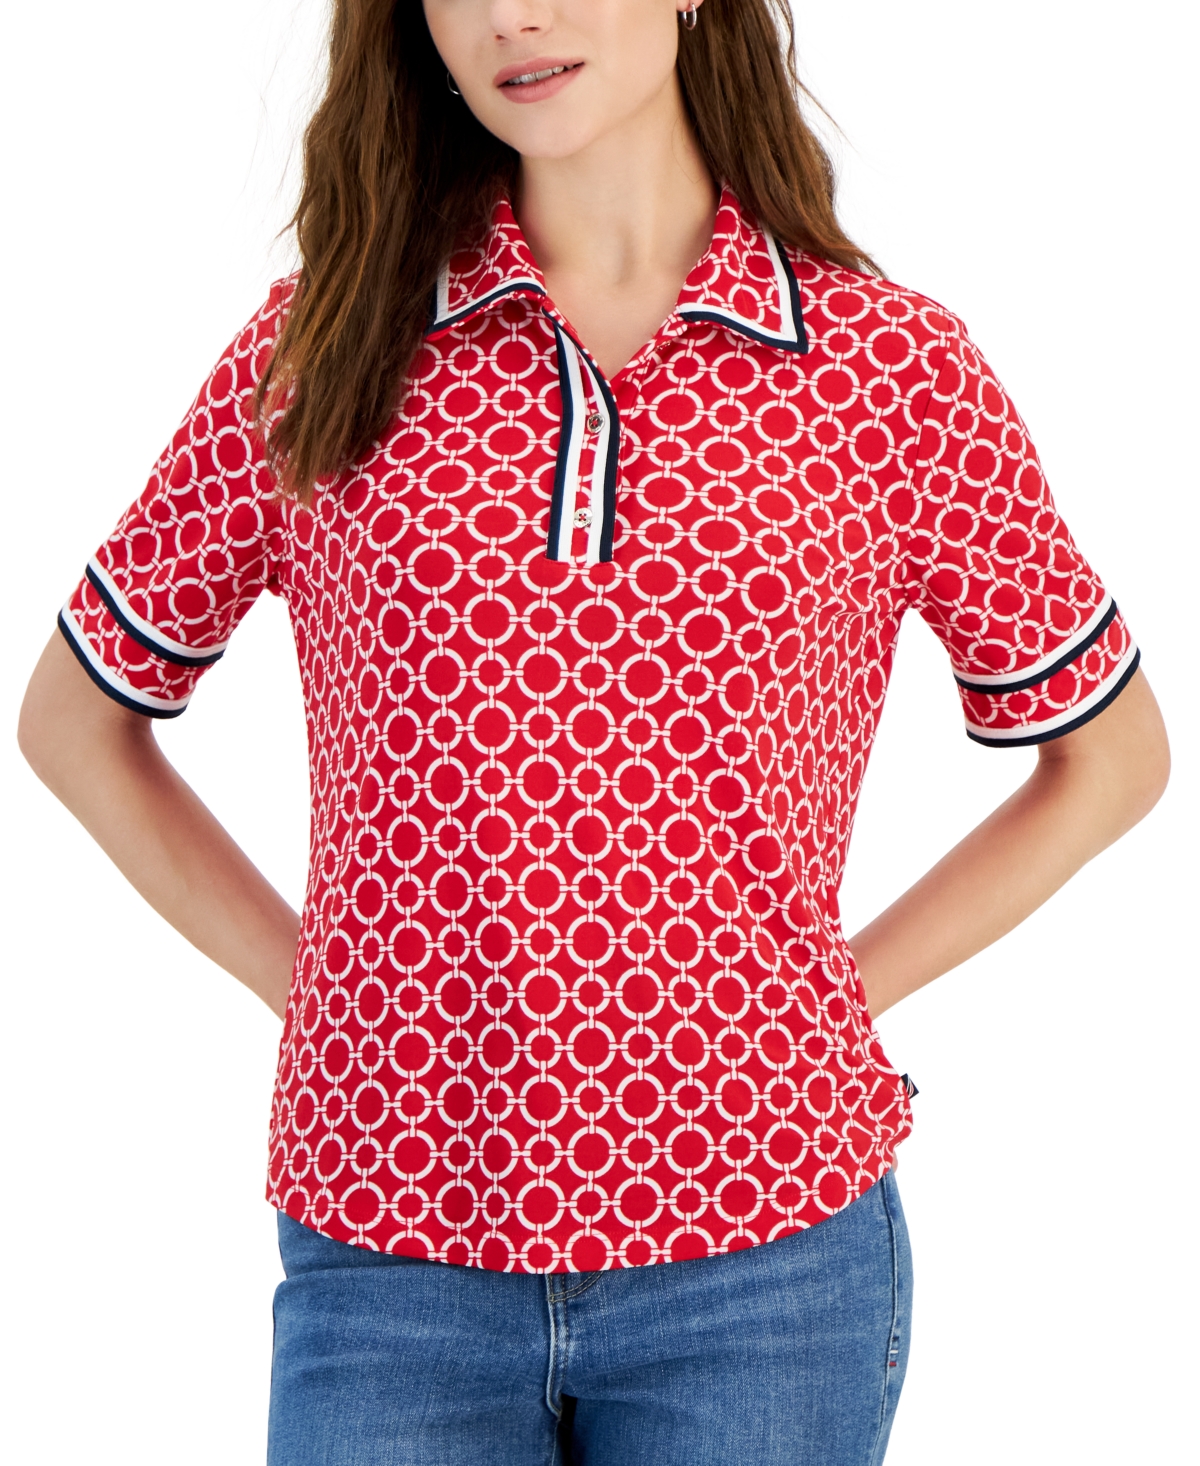 Women's Circle-Link Short-Sleeve Polo Top - Bright Red